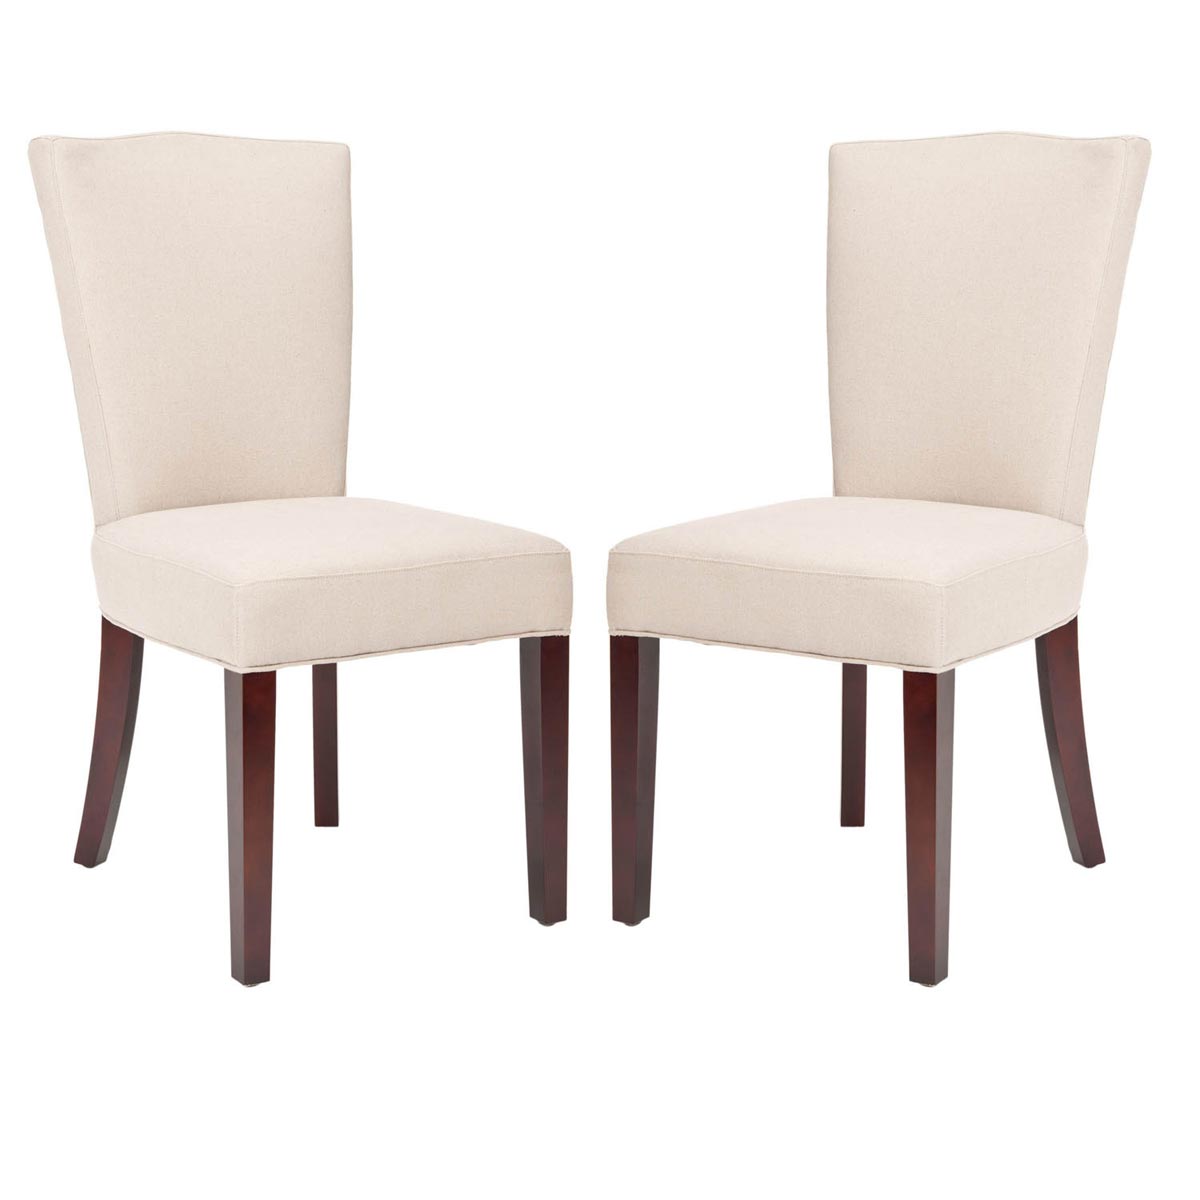 Safavieh - MCR4529A COLETTE SIDE CHAIR - BEIGE (SET OF TWO)